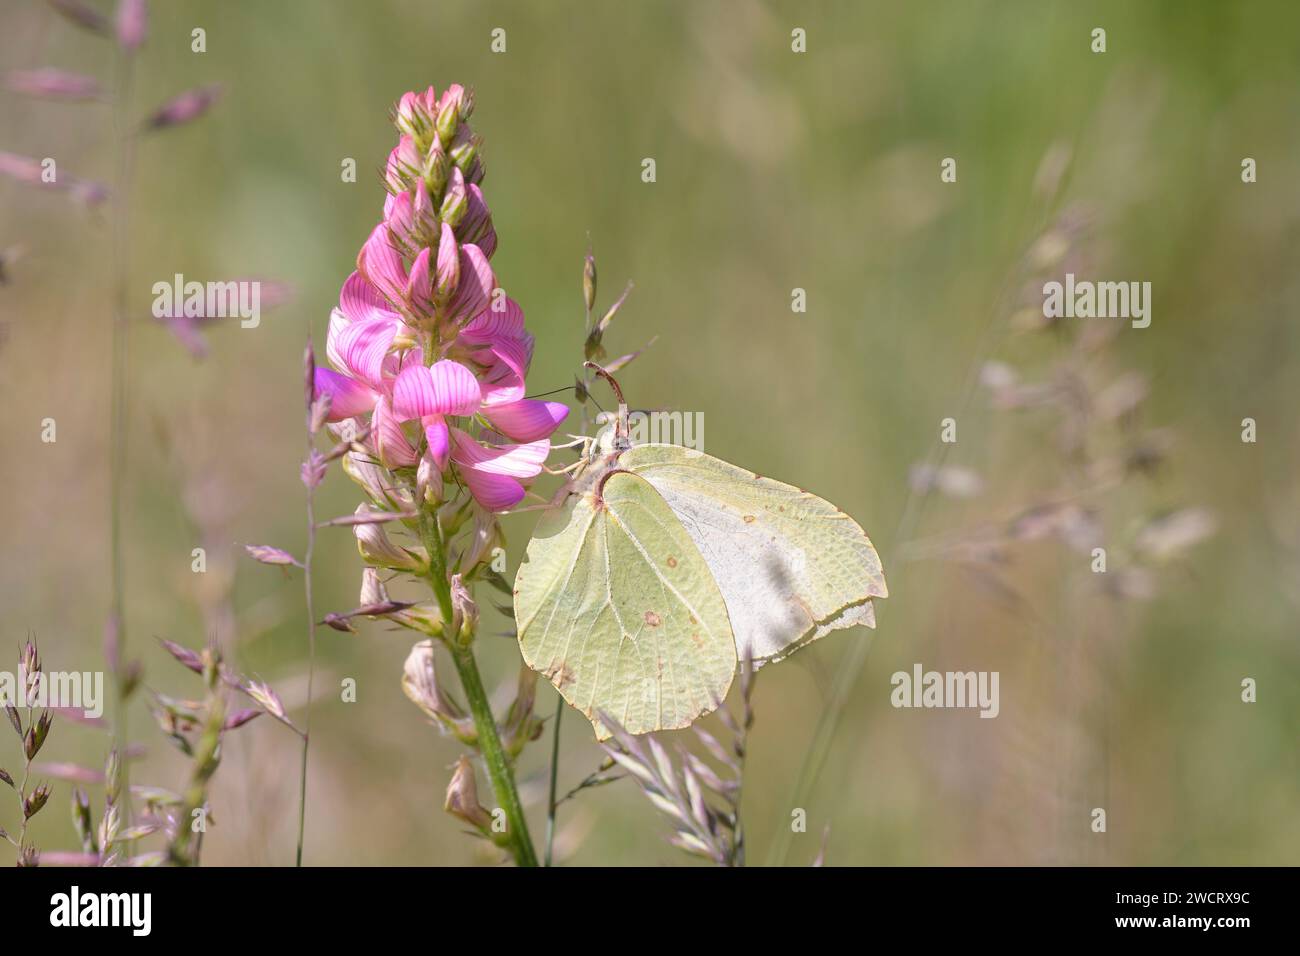 Common brimstone butterfly - Gonepteryx rhamni sucks with its trunk nectar from a blossom of the common sainfoin - Onobrychis viciifolia Stock Photo